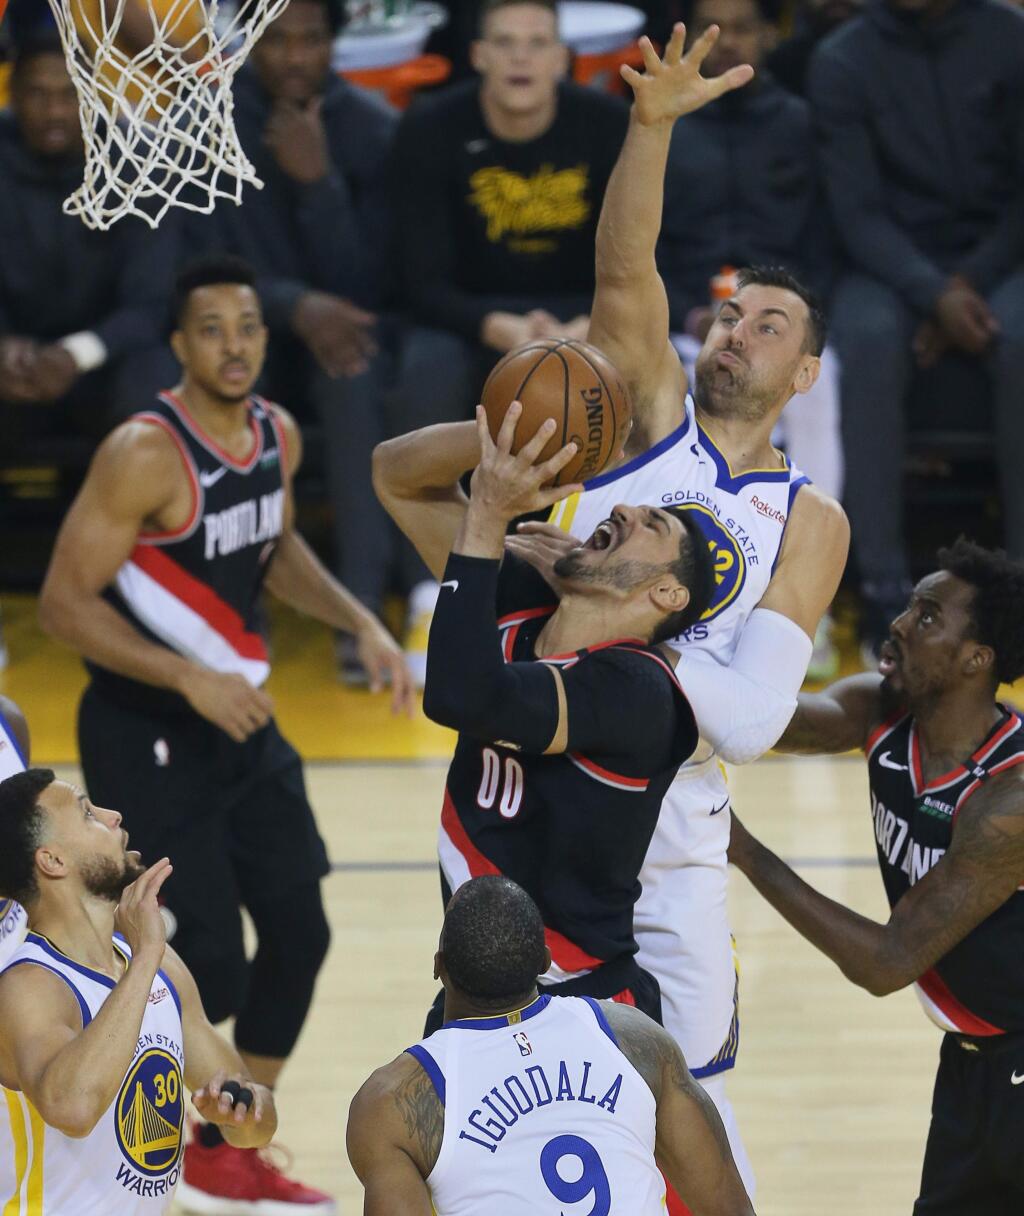 Golden State Warriors center Andrew Bogut defends against Portland Trail Blazers center Enes Kanter during game 1 of the NBA Western Conference Finals in Oakland on Tuesday, May 14, 2019. (Christopher Chung / The Press Democrat)